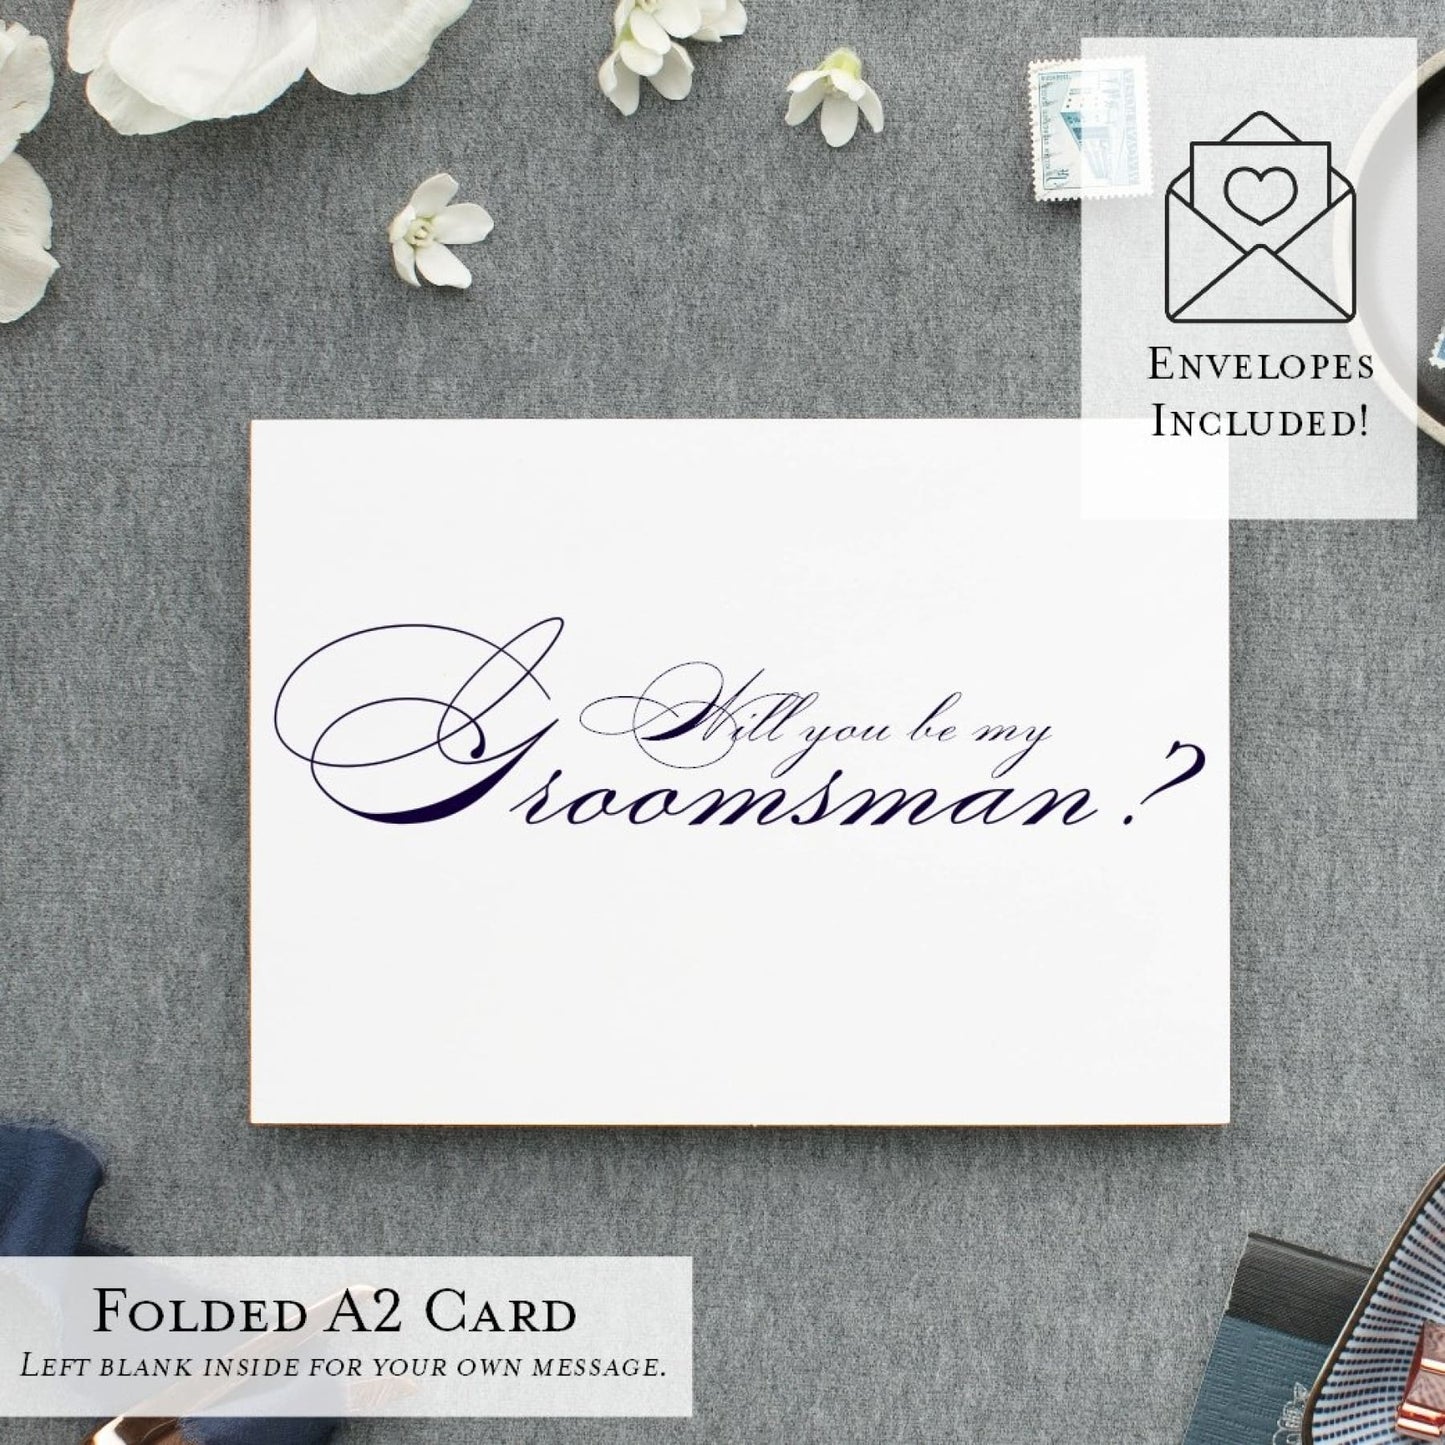 Will You Be My...? Cards, Wedding Party Proposal Cards, Style A - All That Glitters Invitations